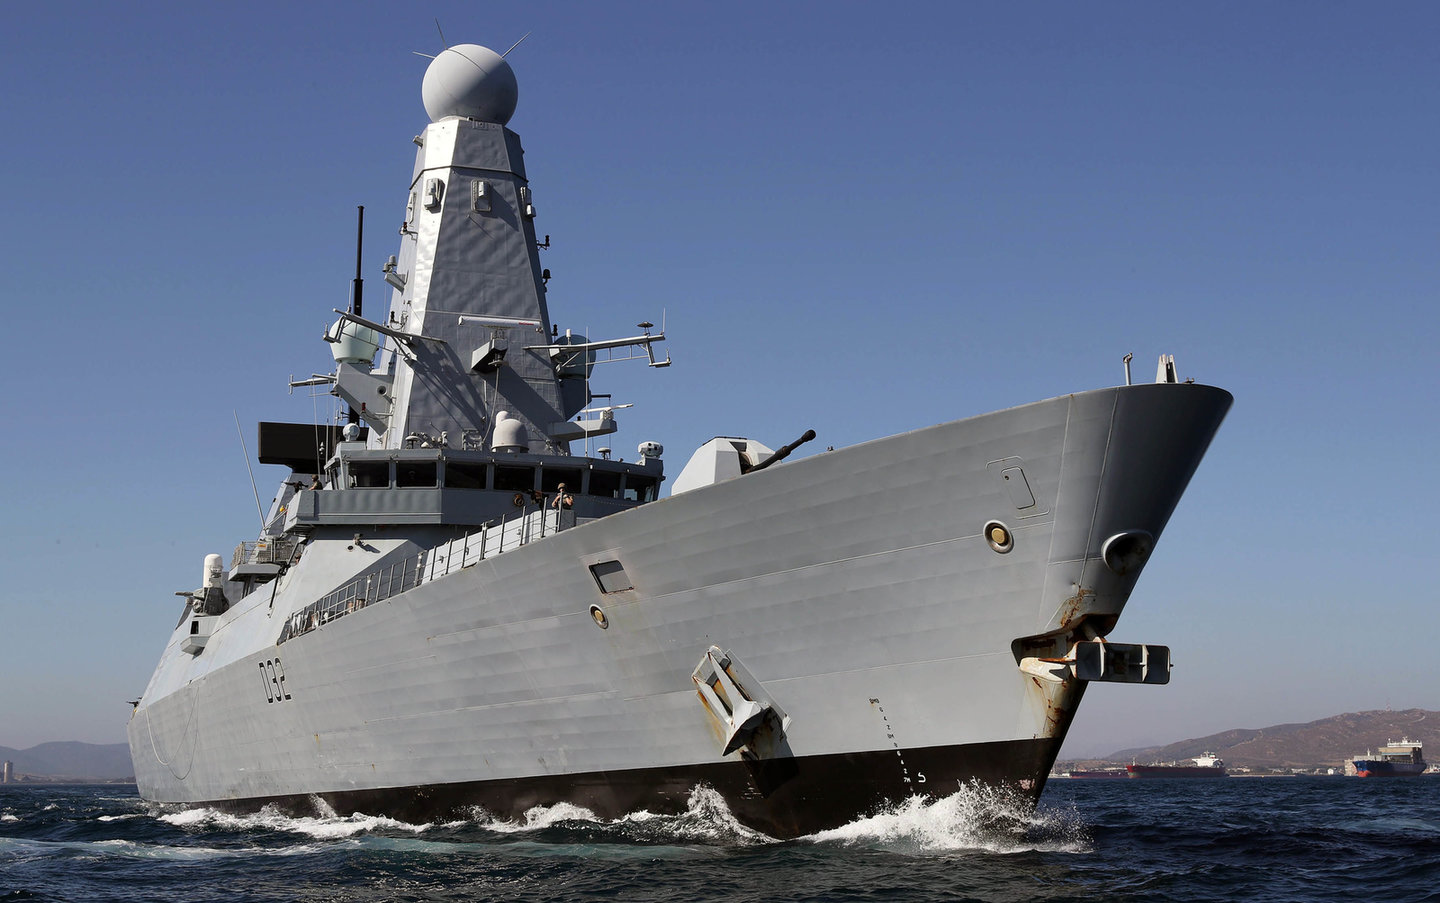 The Royal Navy’s Type 45 entered service late and over budget